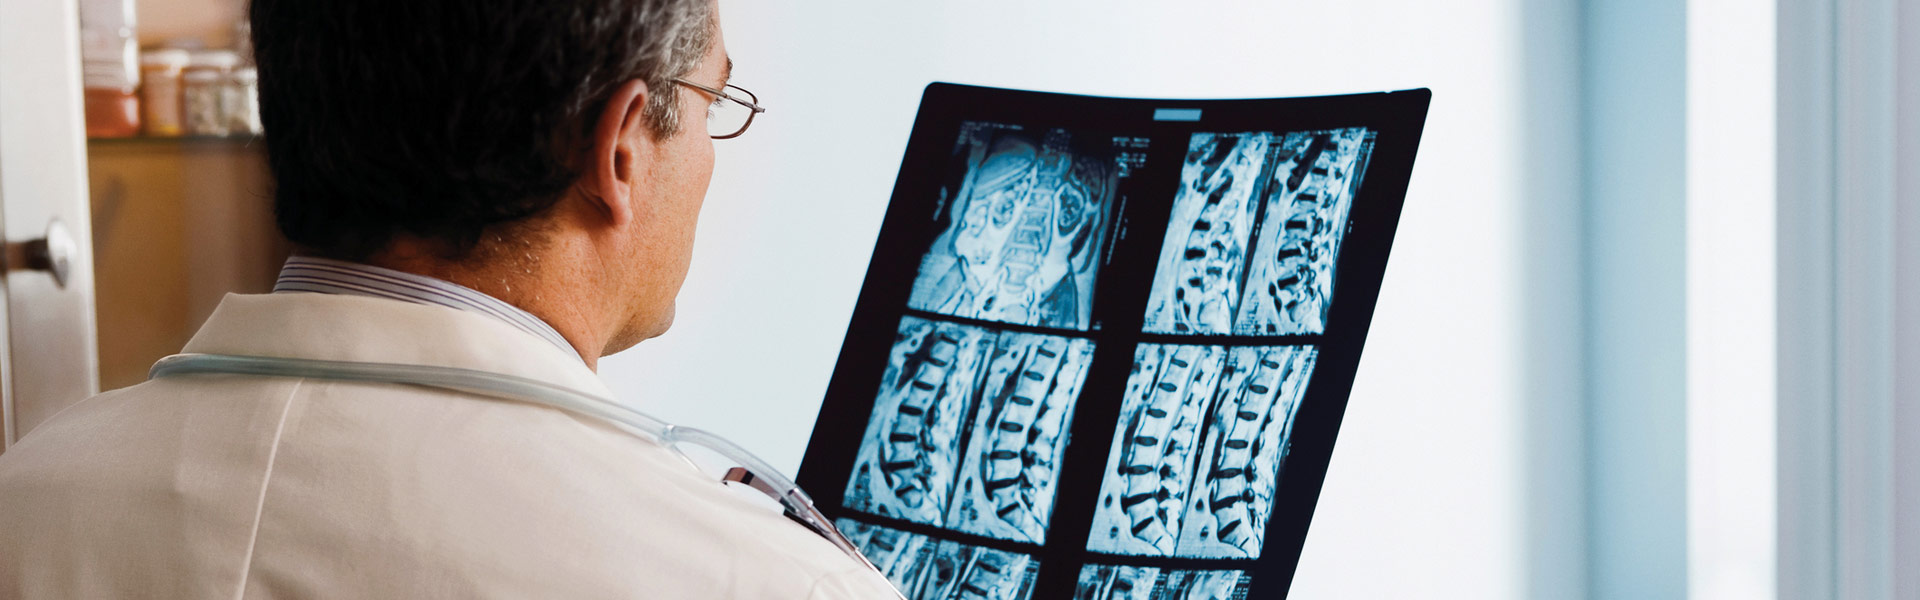 Doctor evaluating an x-ray for a spinal injury